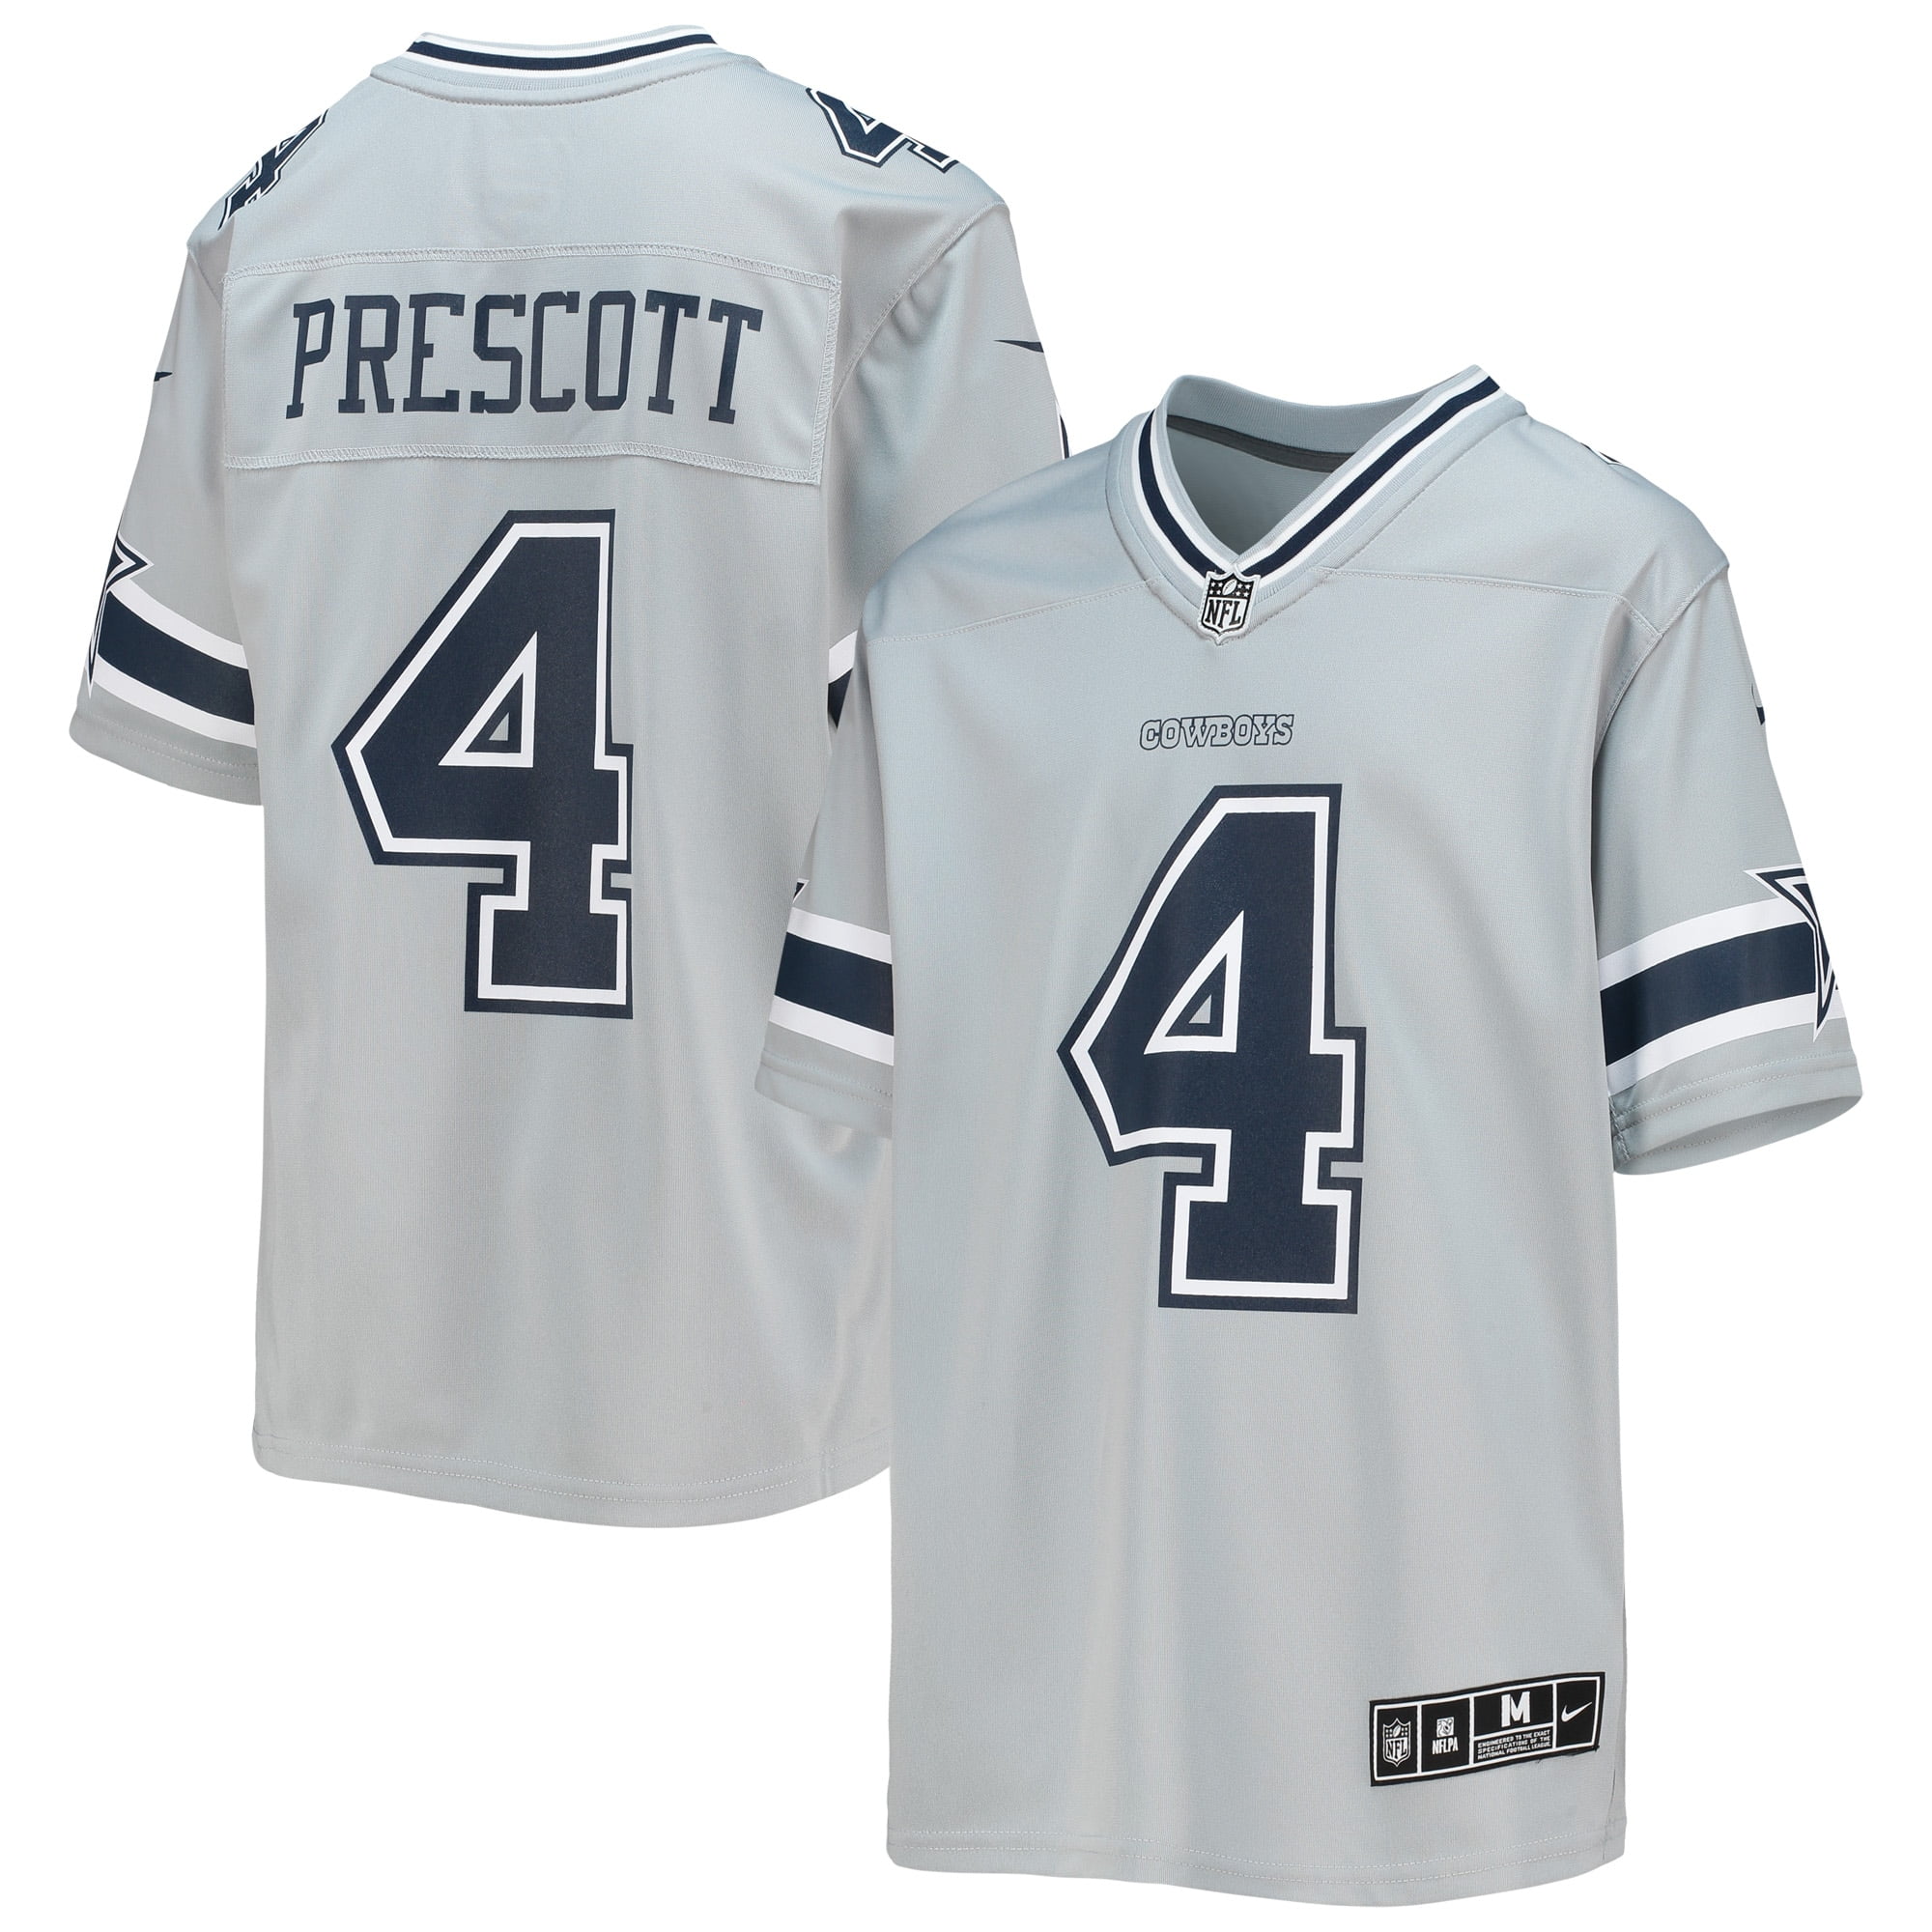 Dez Bryant Dallas Cowboys 50th Anniversary Jersey for Sale in